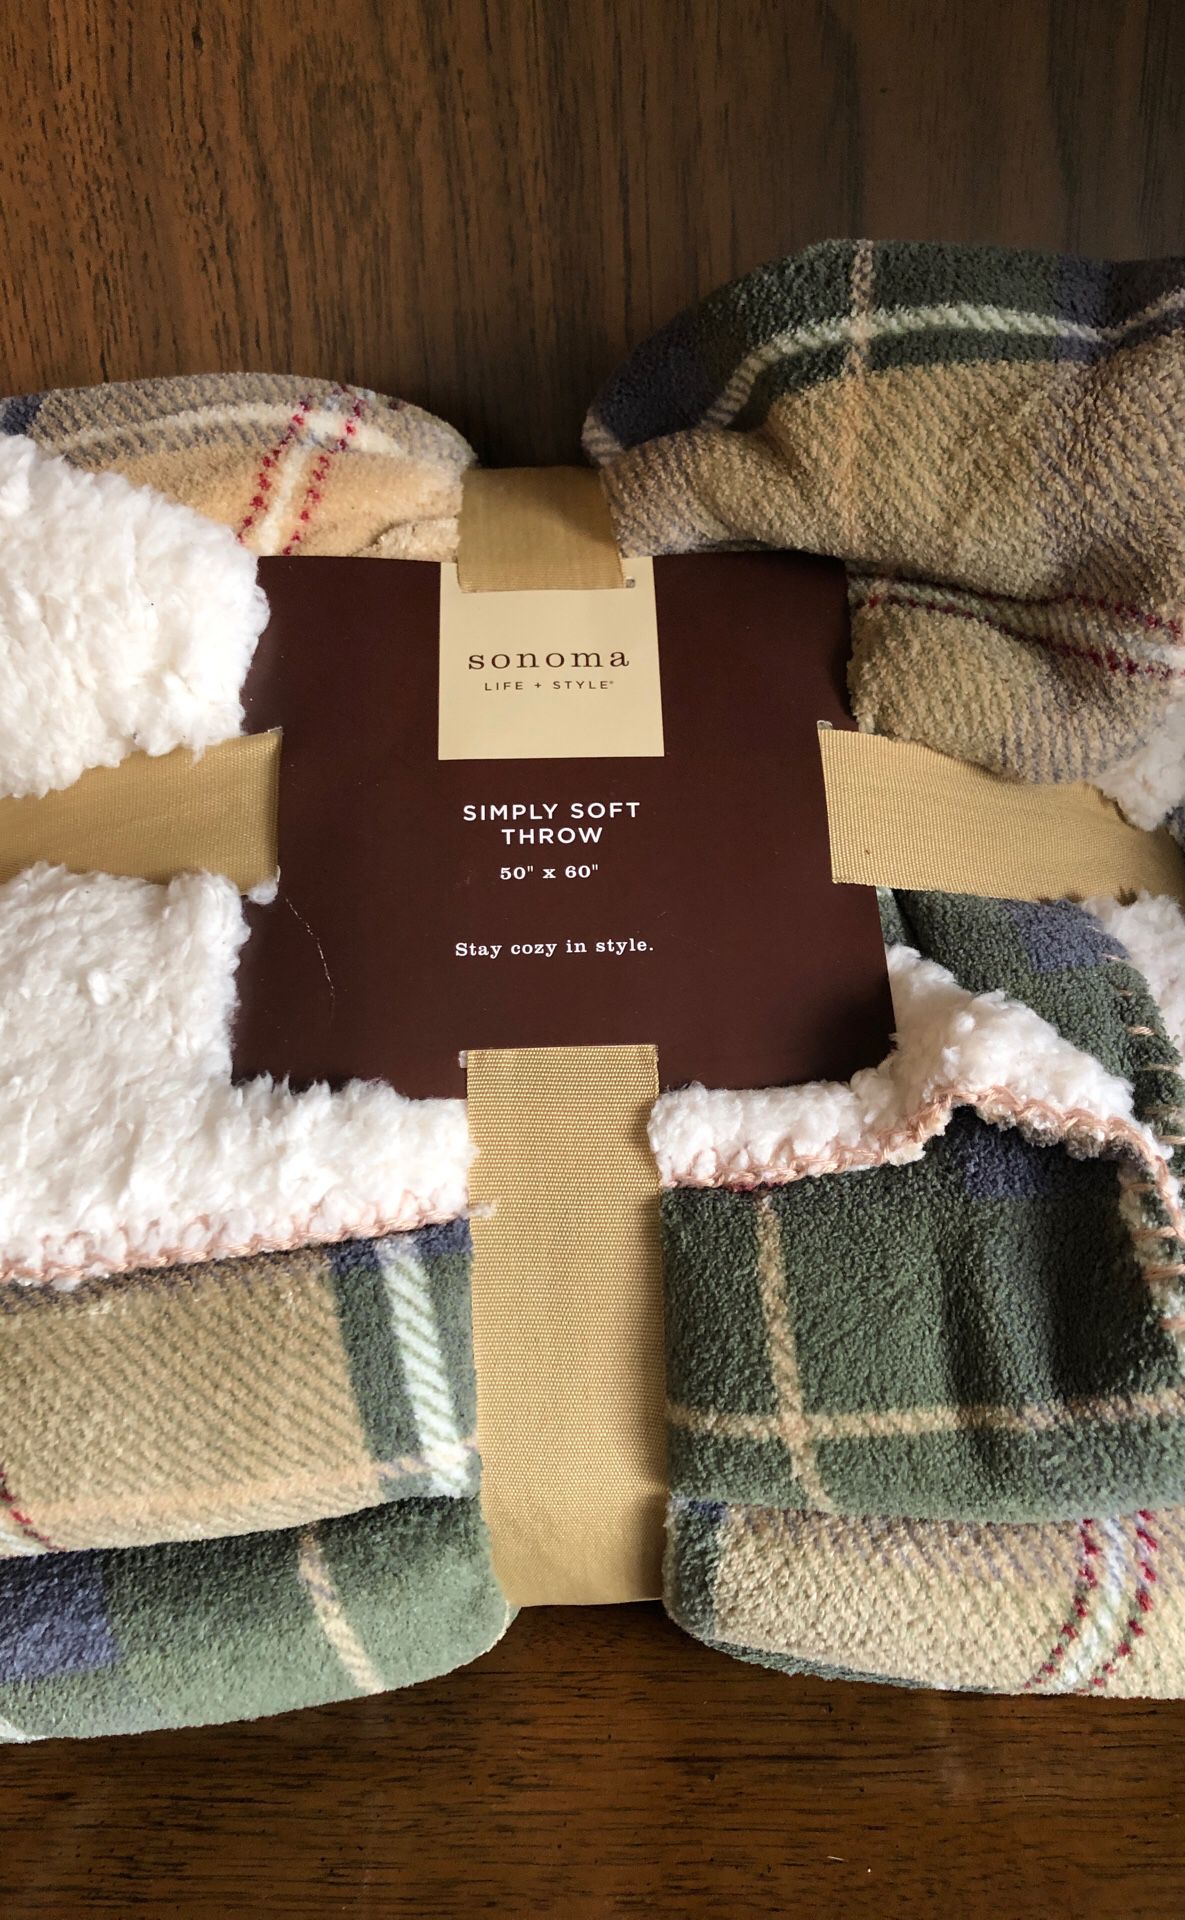 Simply soft throw blanket